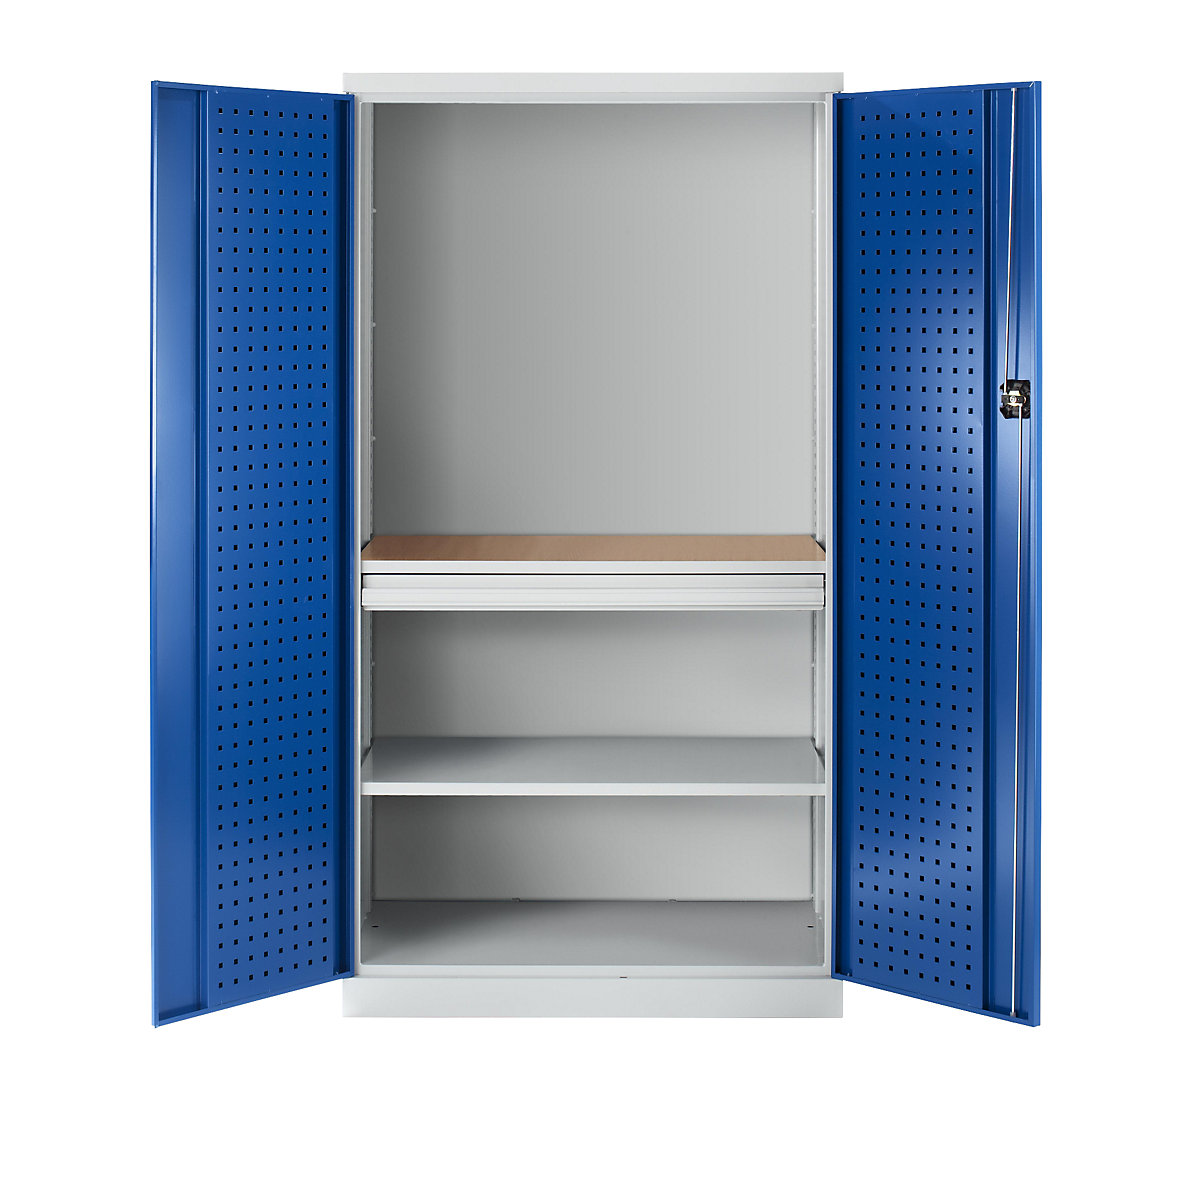 Tool cupboard with perforations